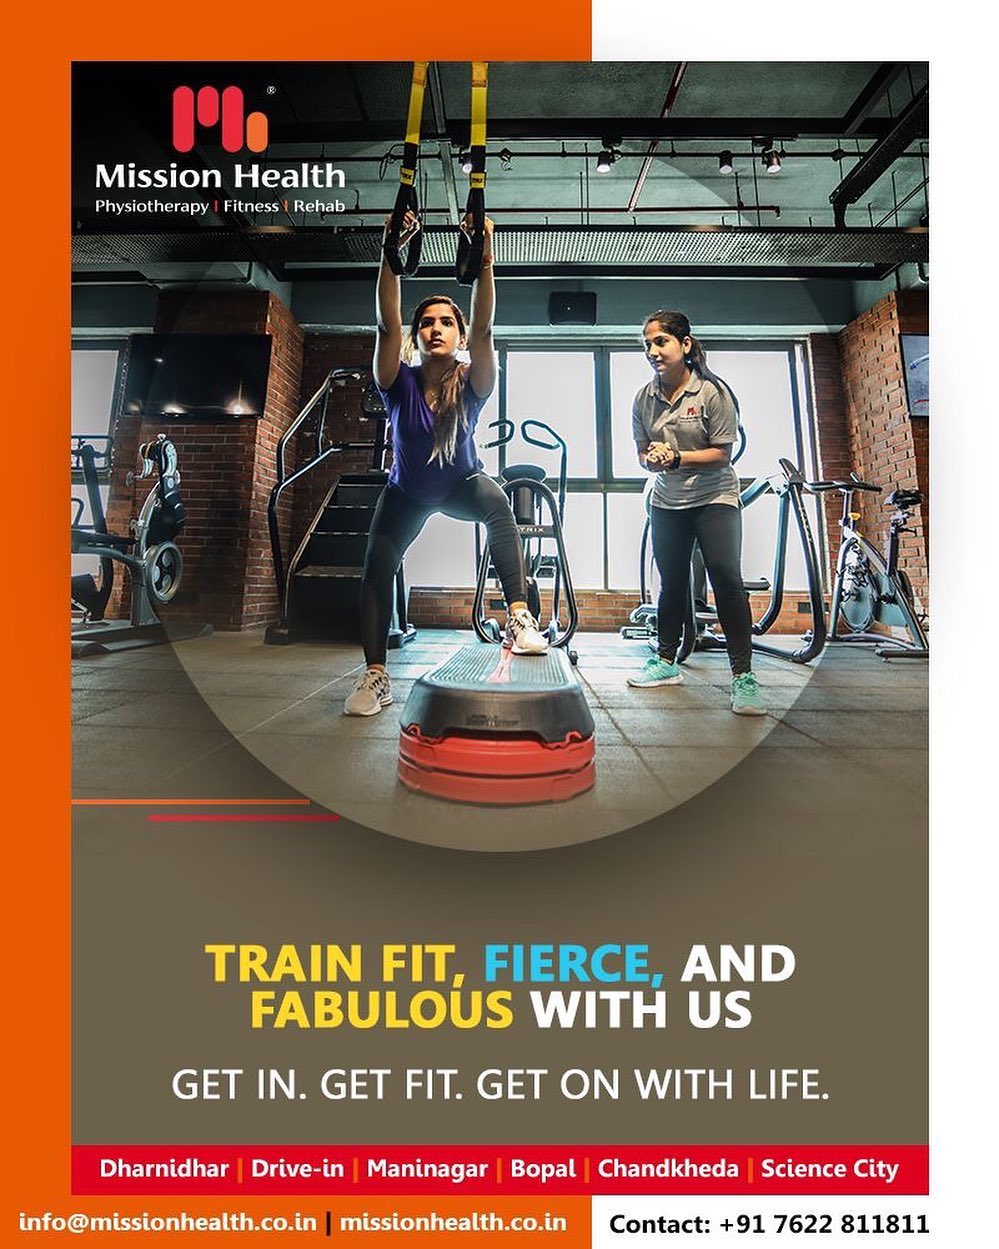 Being healthy & fit will not just gain your body energy but will give you a fresh dimension towards your personal & professional relationship! Amp your physique by getting trained from our proficient & dynamic Sports Physios! 
#ProficientSportsPhysios #SportsPhysios #GetFit #MissionHealth #MissionHealthIndia #fitnessRehab #AbilityClinic #MovementIsLife #PersonalTraining #weightmanagement